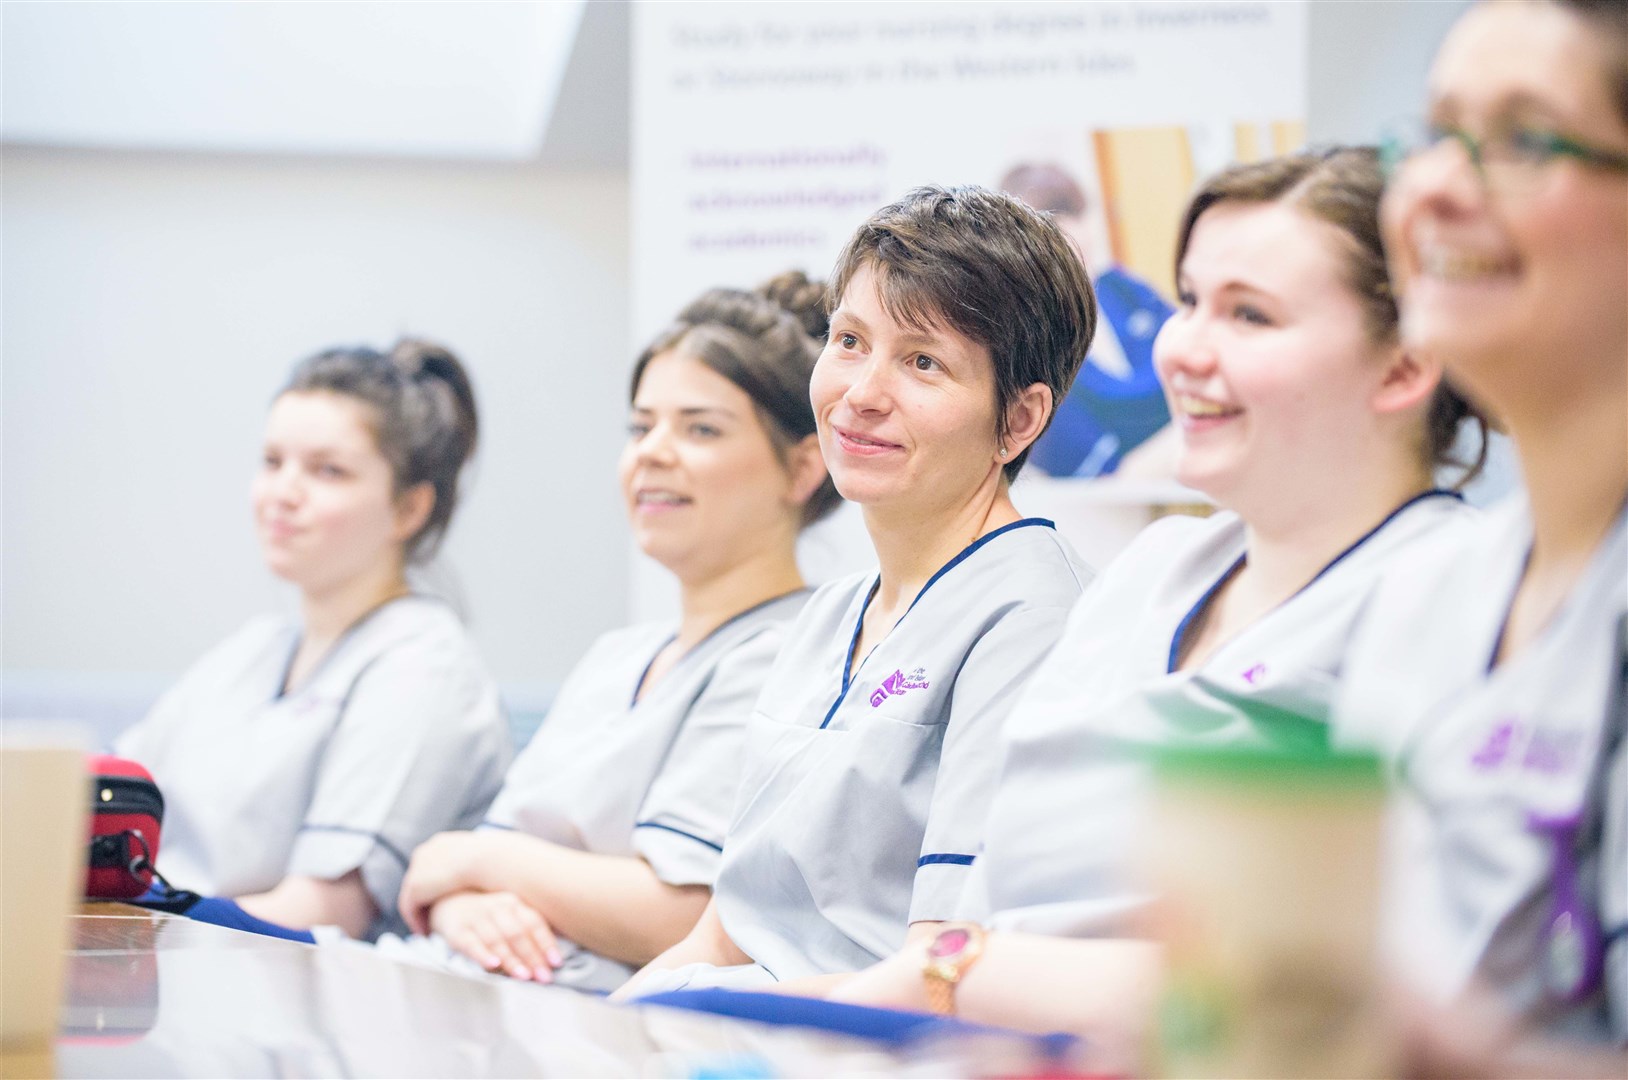 More than 120 UHI nursing and midwifery students have started their final placements early to help bolster the NHS workforce.